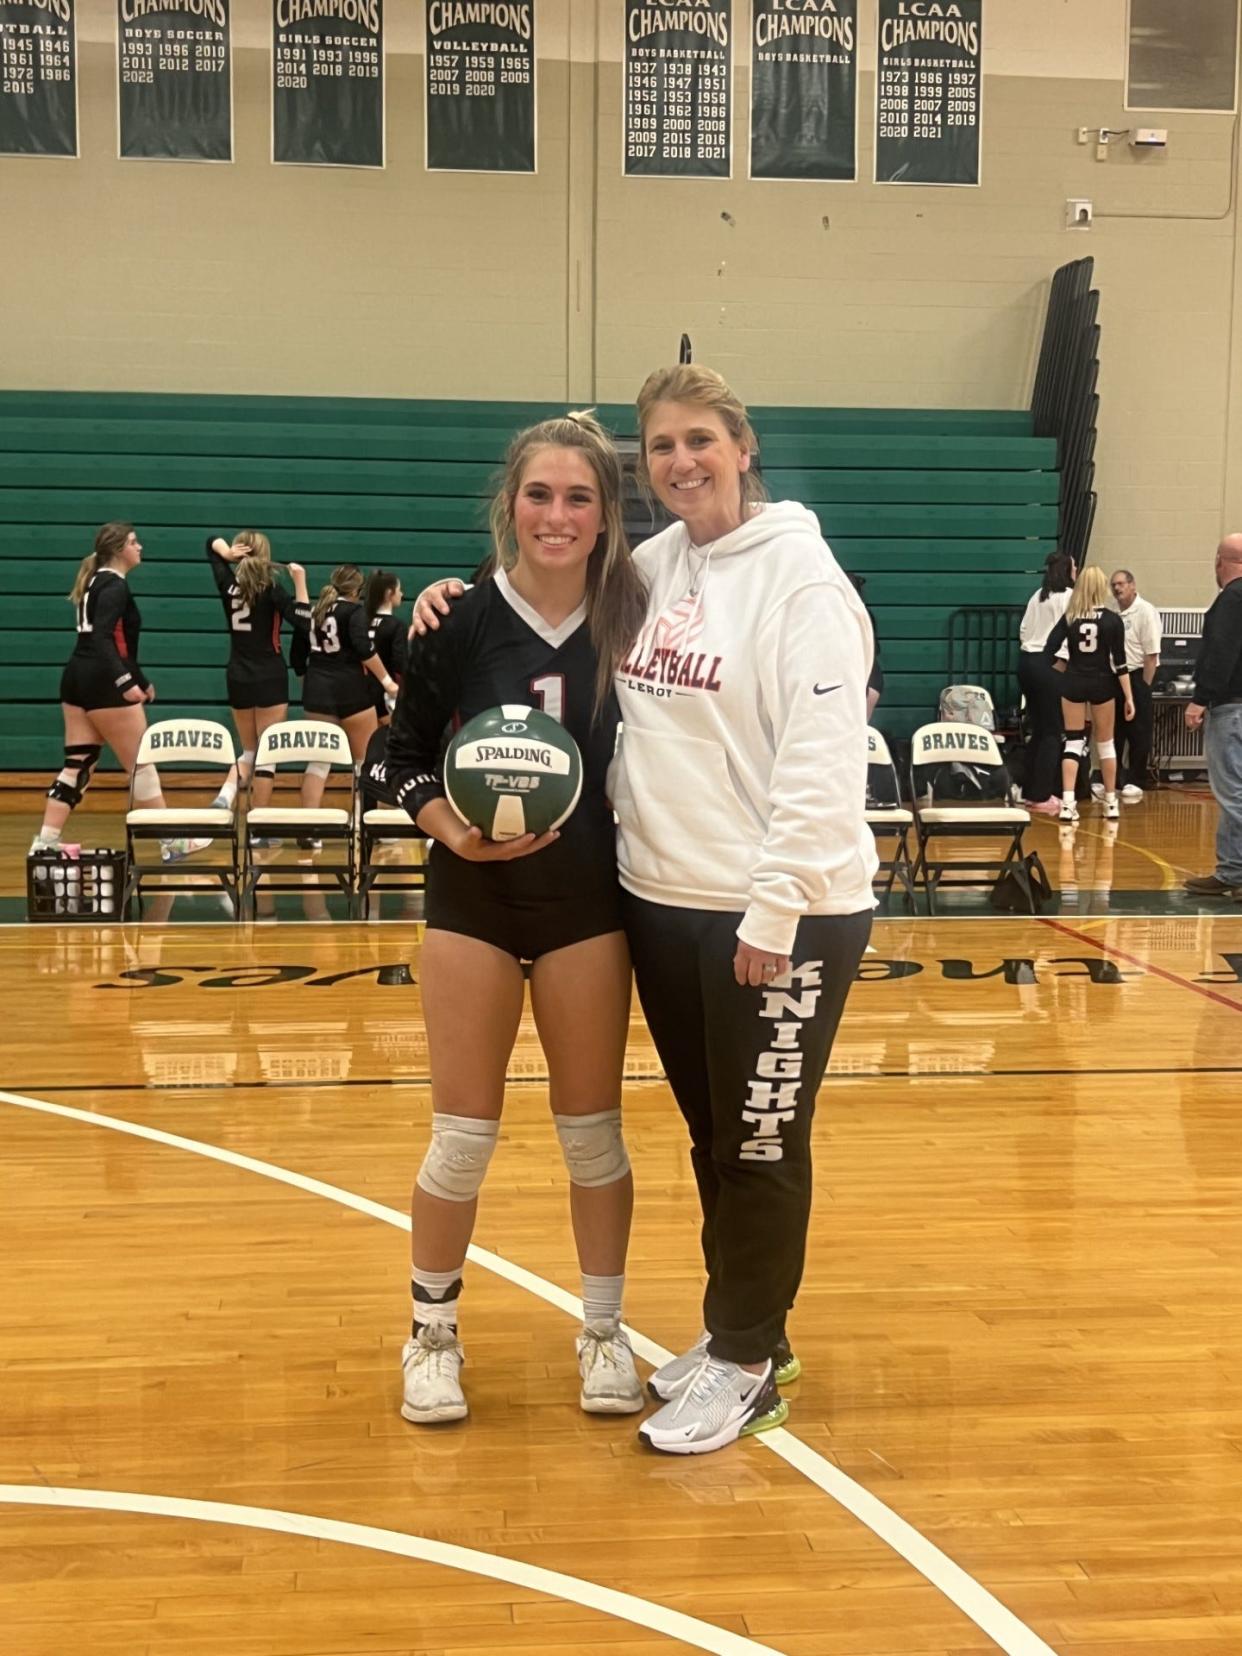 LeRoy senior captain Dana Reschke and coach Susan Staba after a senior night straight sets win over Geneseo on Wednesday. Reschke dished out 22 assists to surpass 1,000 career assists.